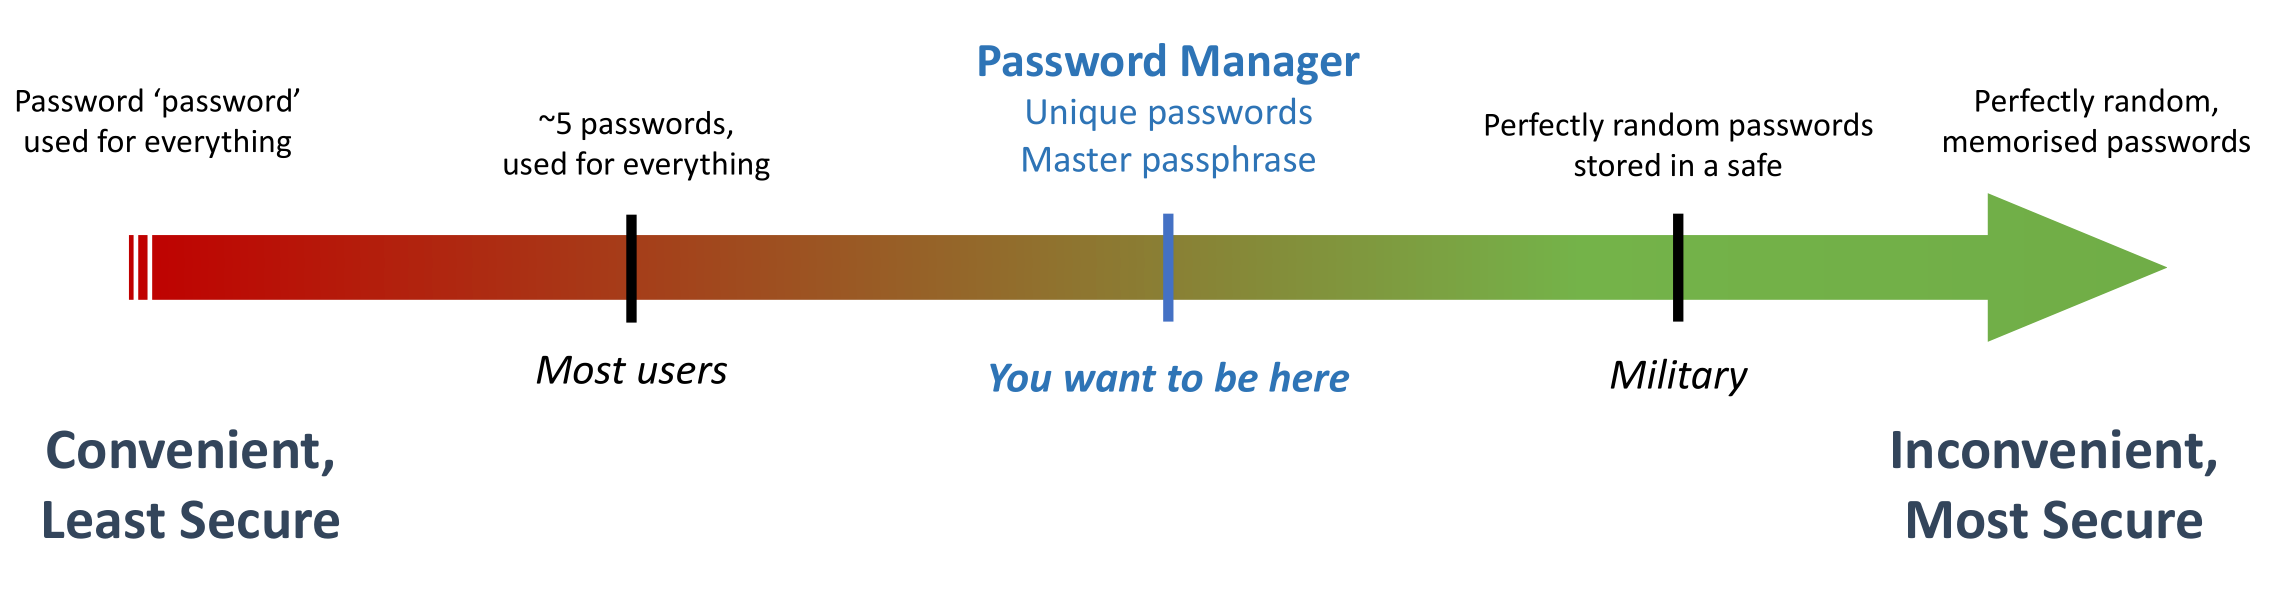 Security trade-offs in password practices